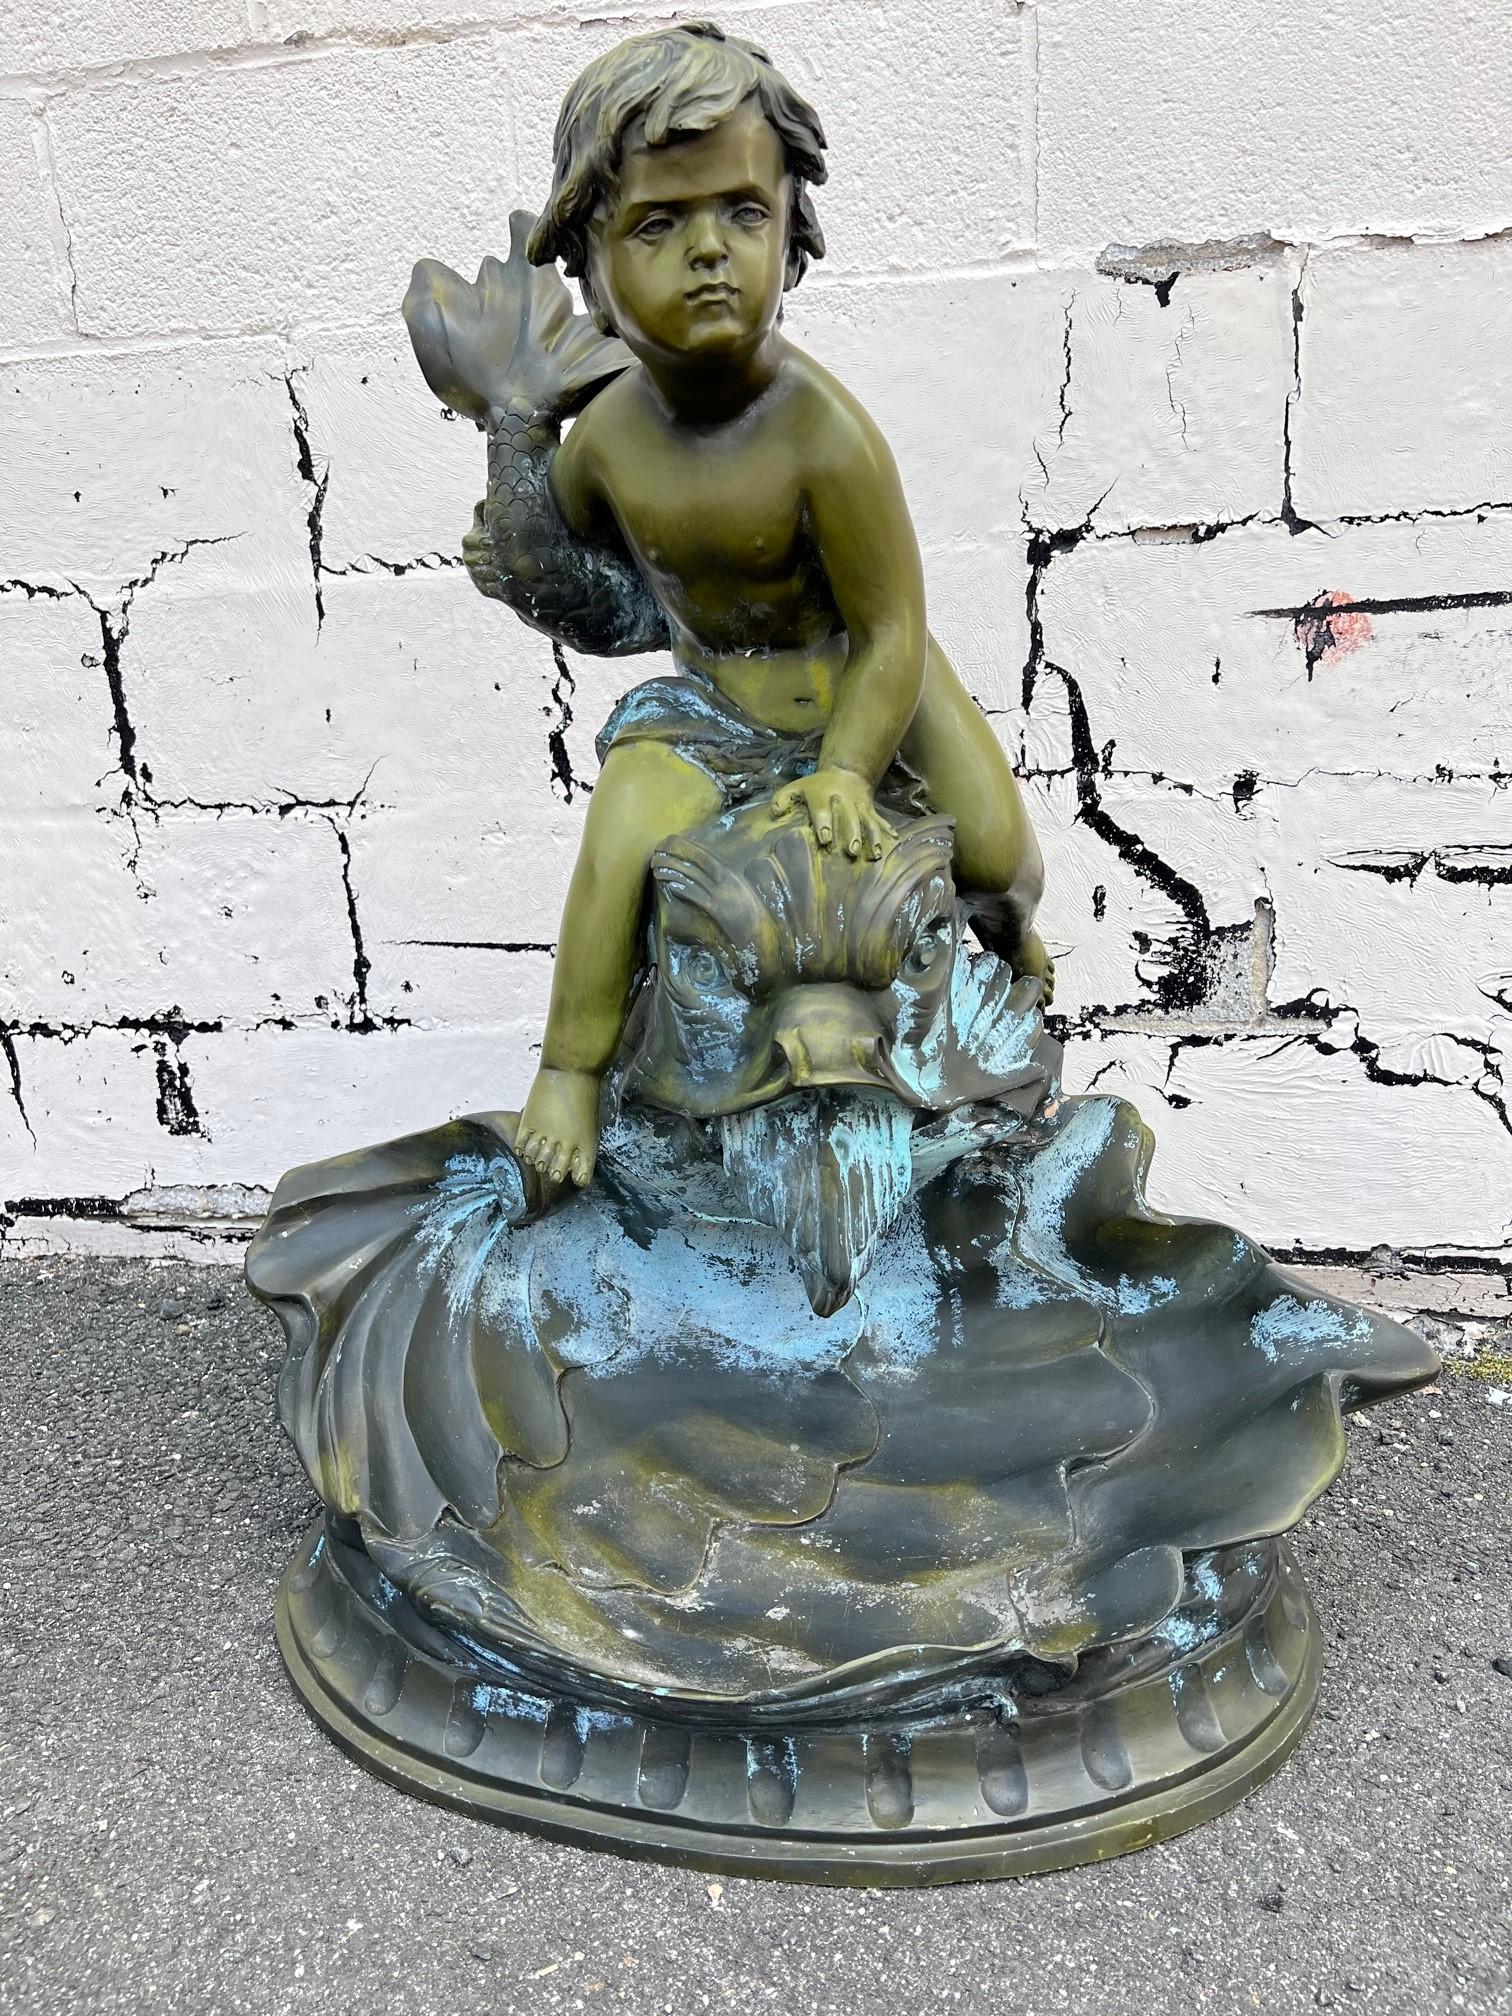 Vintage bronze fountain from the late 20th century, depicting a putto riding a dolphin fish on top of a large clam shell. Created with the traditional technique of the lost wax that allows a great precision and finesse in the details. This fountain